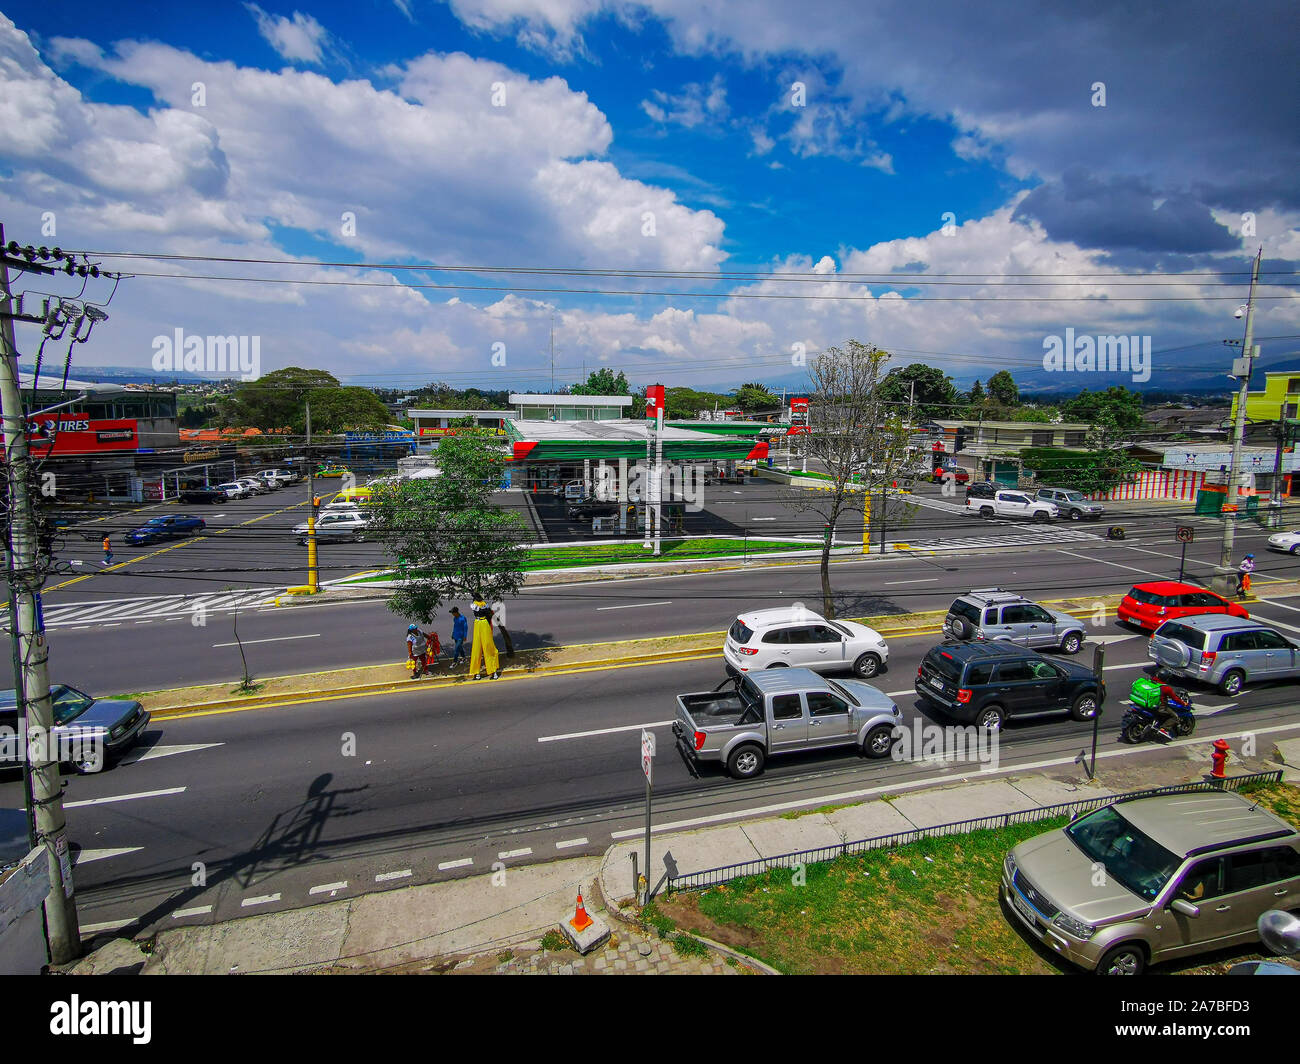 Tumbaco, Pichincha, Ecuador - October 25, 2019: Puma gas station in the  central road of the town of Tumbaco near the city of Quito Stock Photo -  Alamy